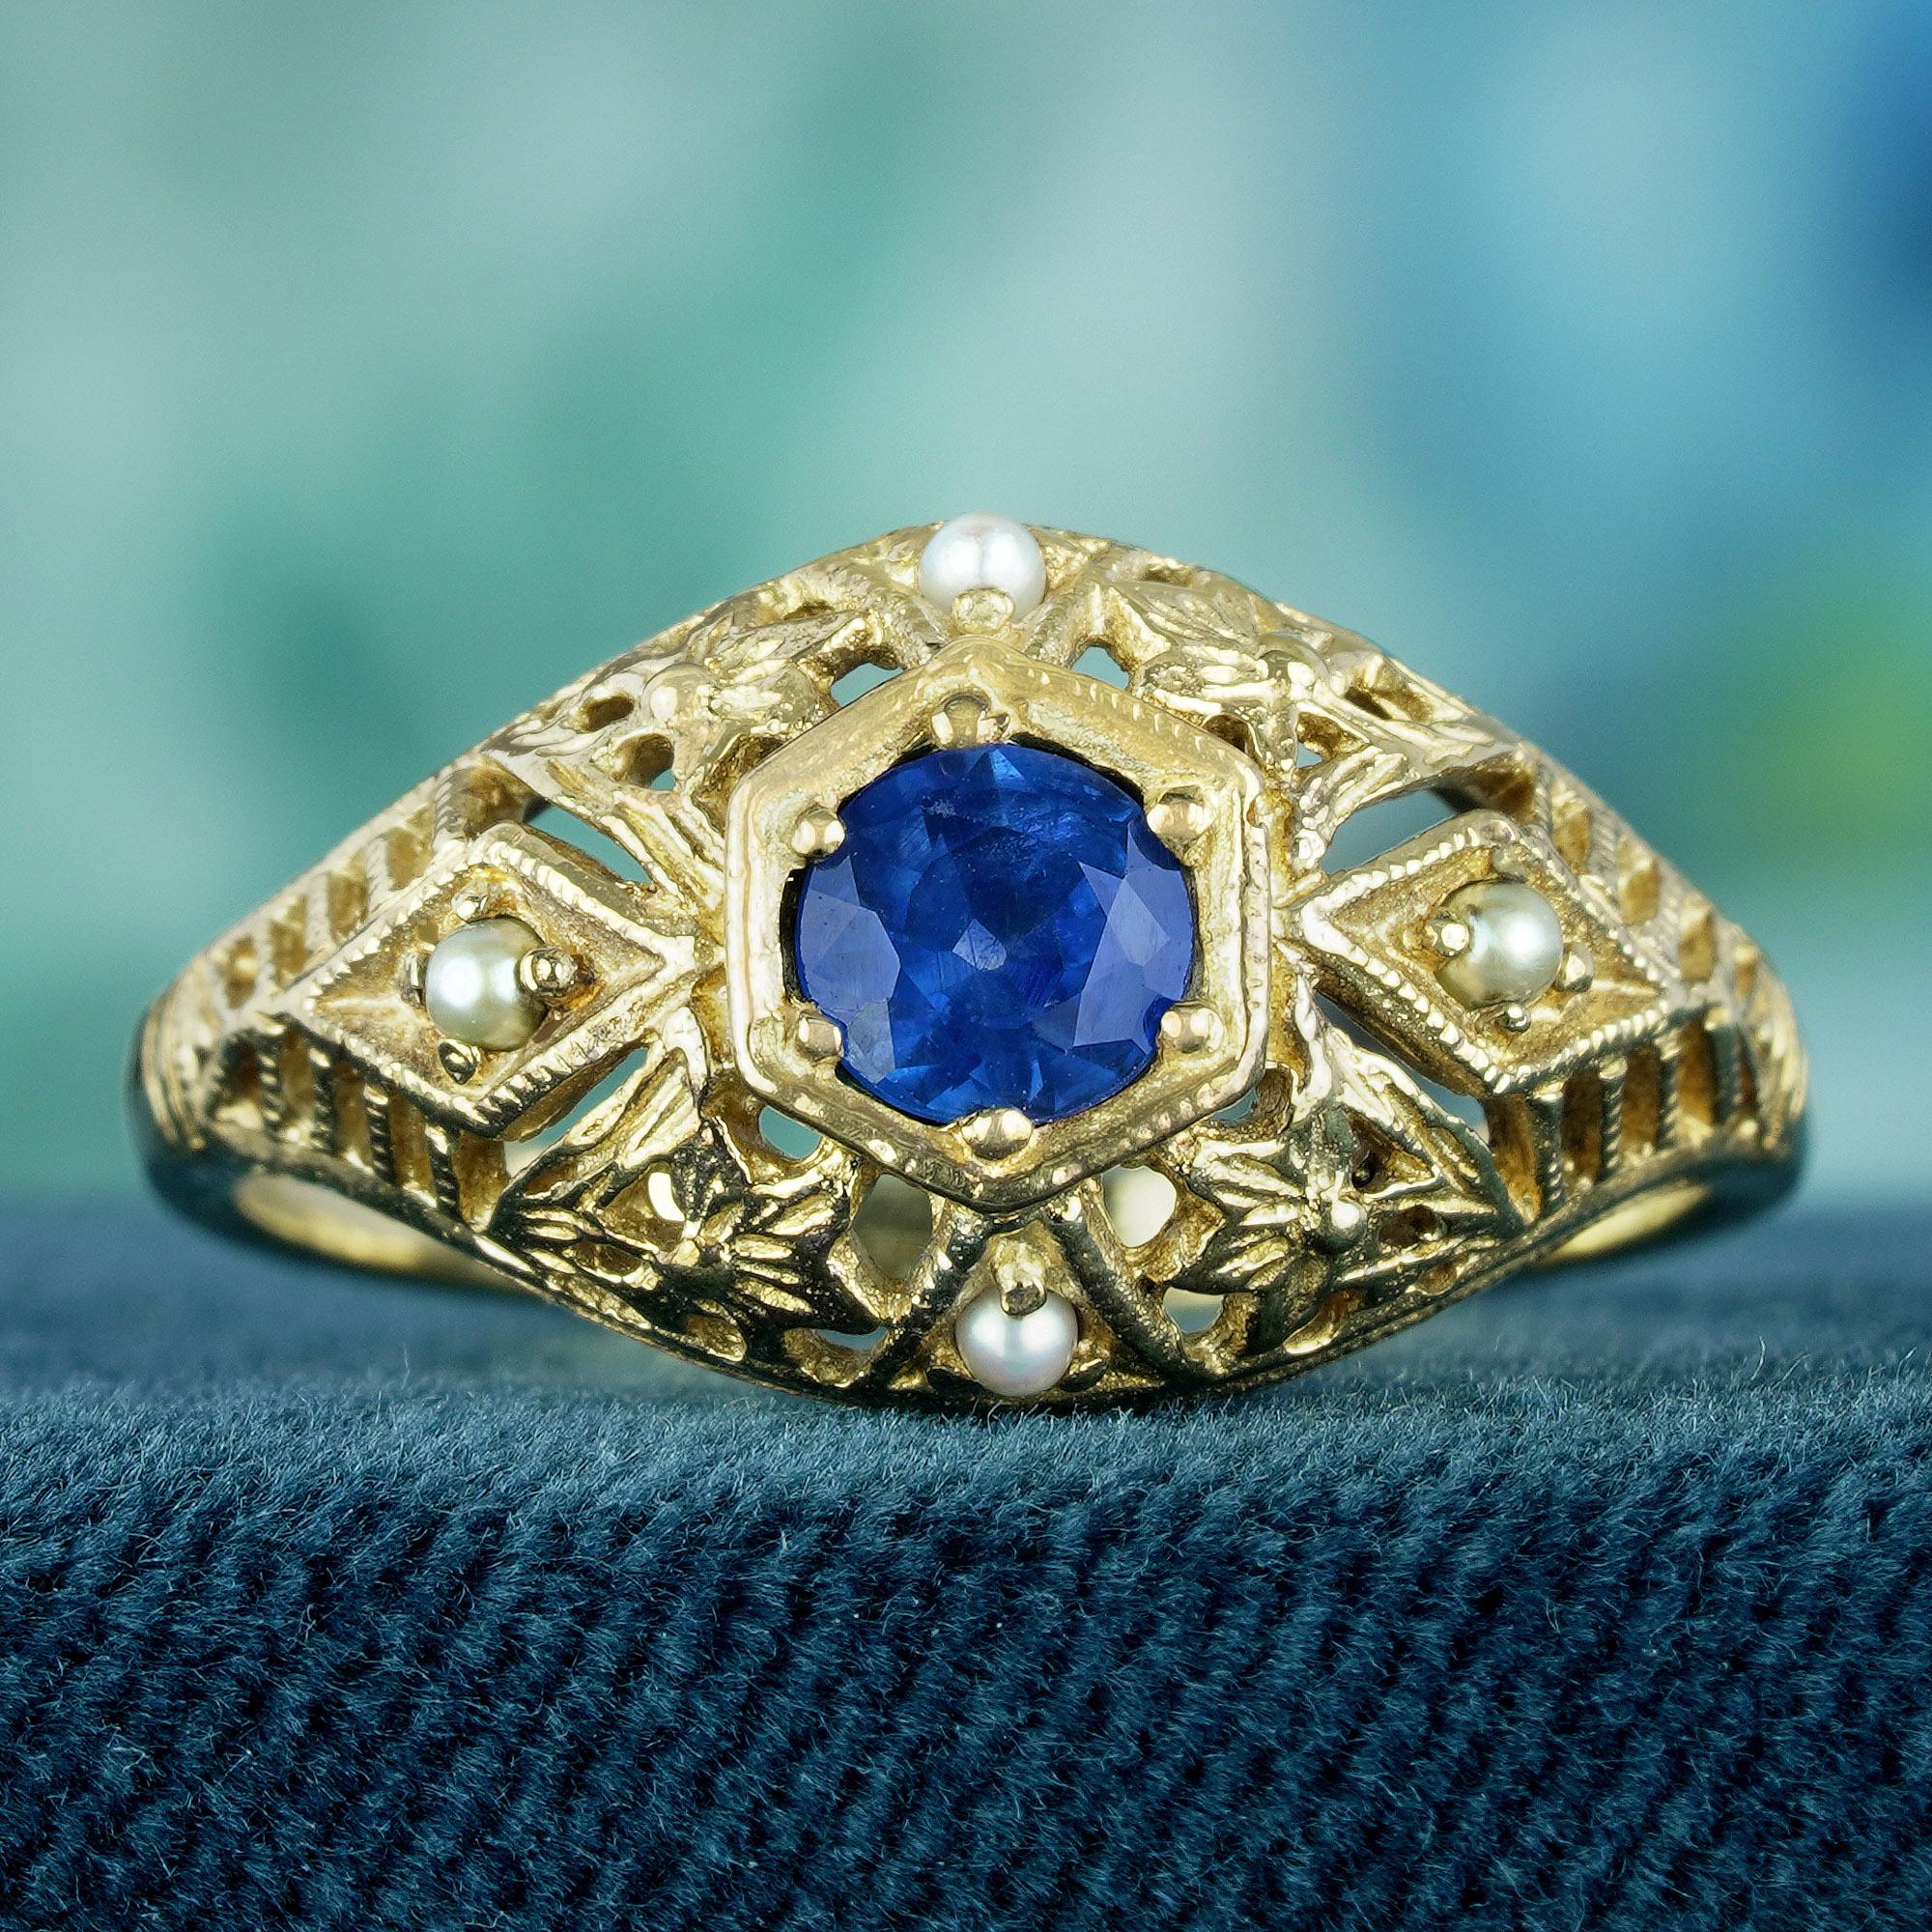 Expertly crafted from delicate filigree yellow gold, this captivating vintage design encircles the round blue sapphire at its center with timeless elegance. Intricate openwork detailing enhances the ring, infusing it with a touch of vintage glamour.